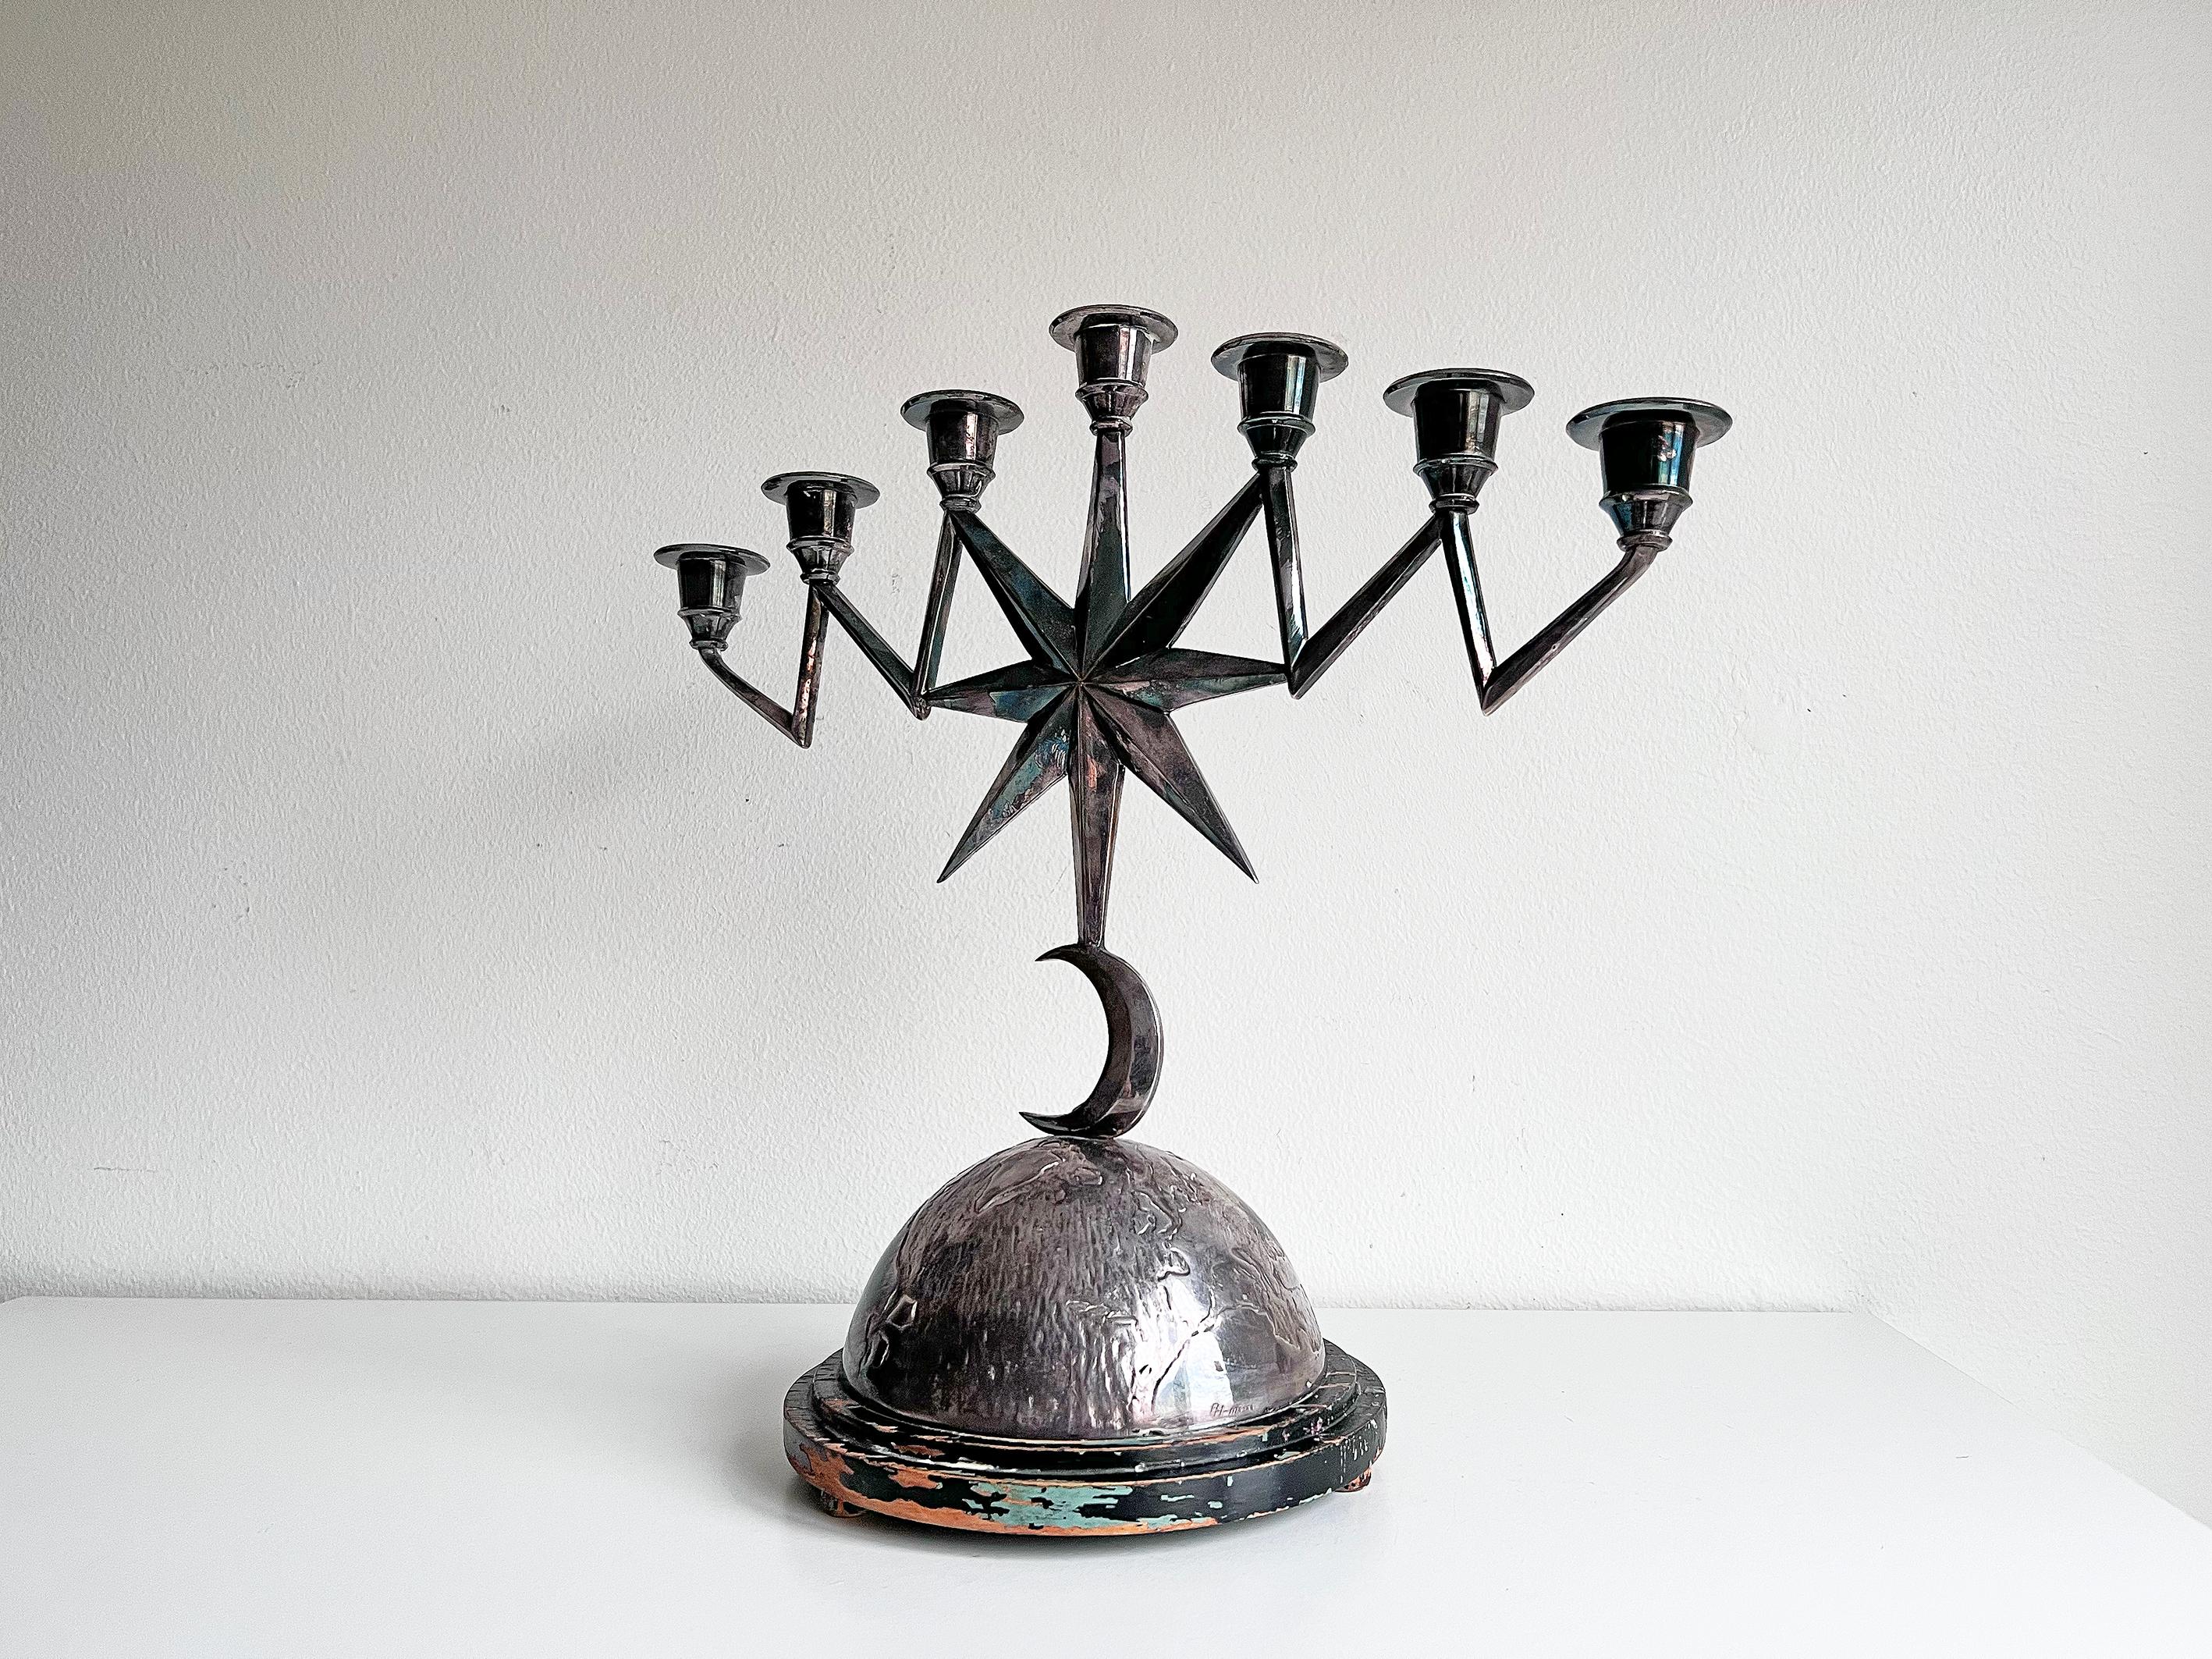 Early 20th Century Art Deco 7-Armed Candelabra, 1920 - 30s For Sale